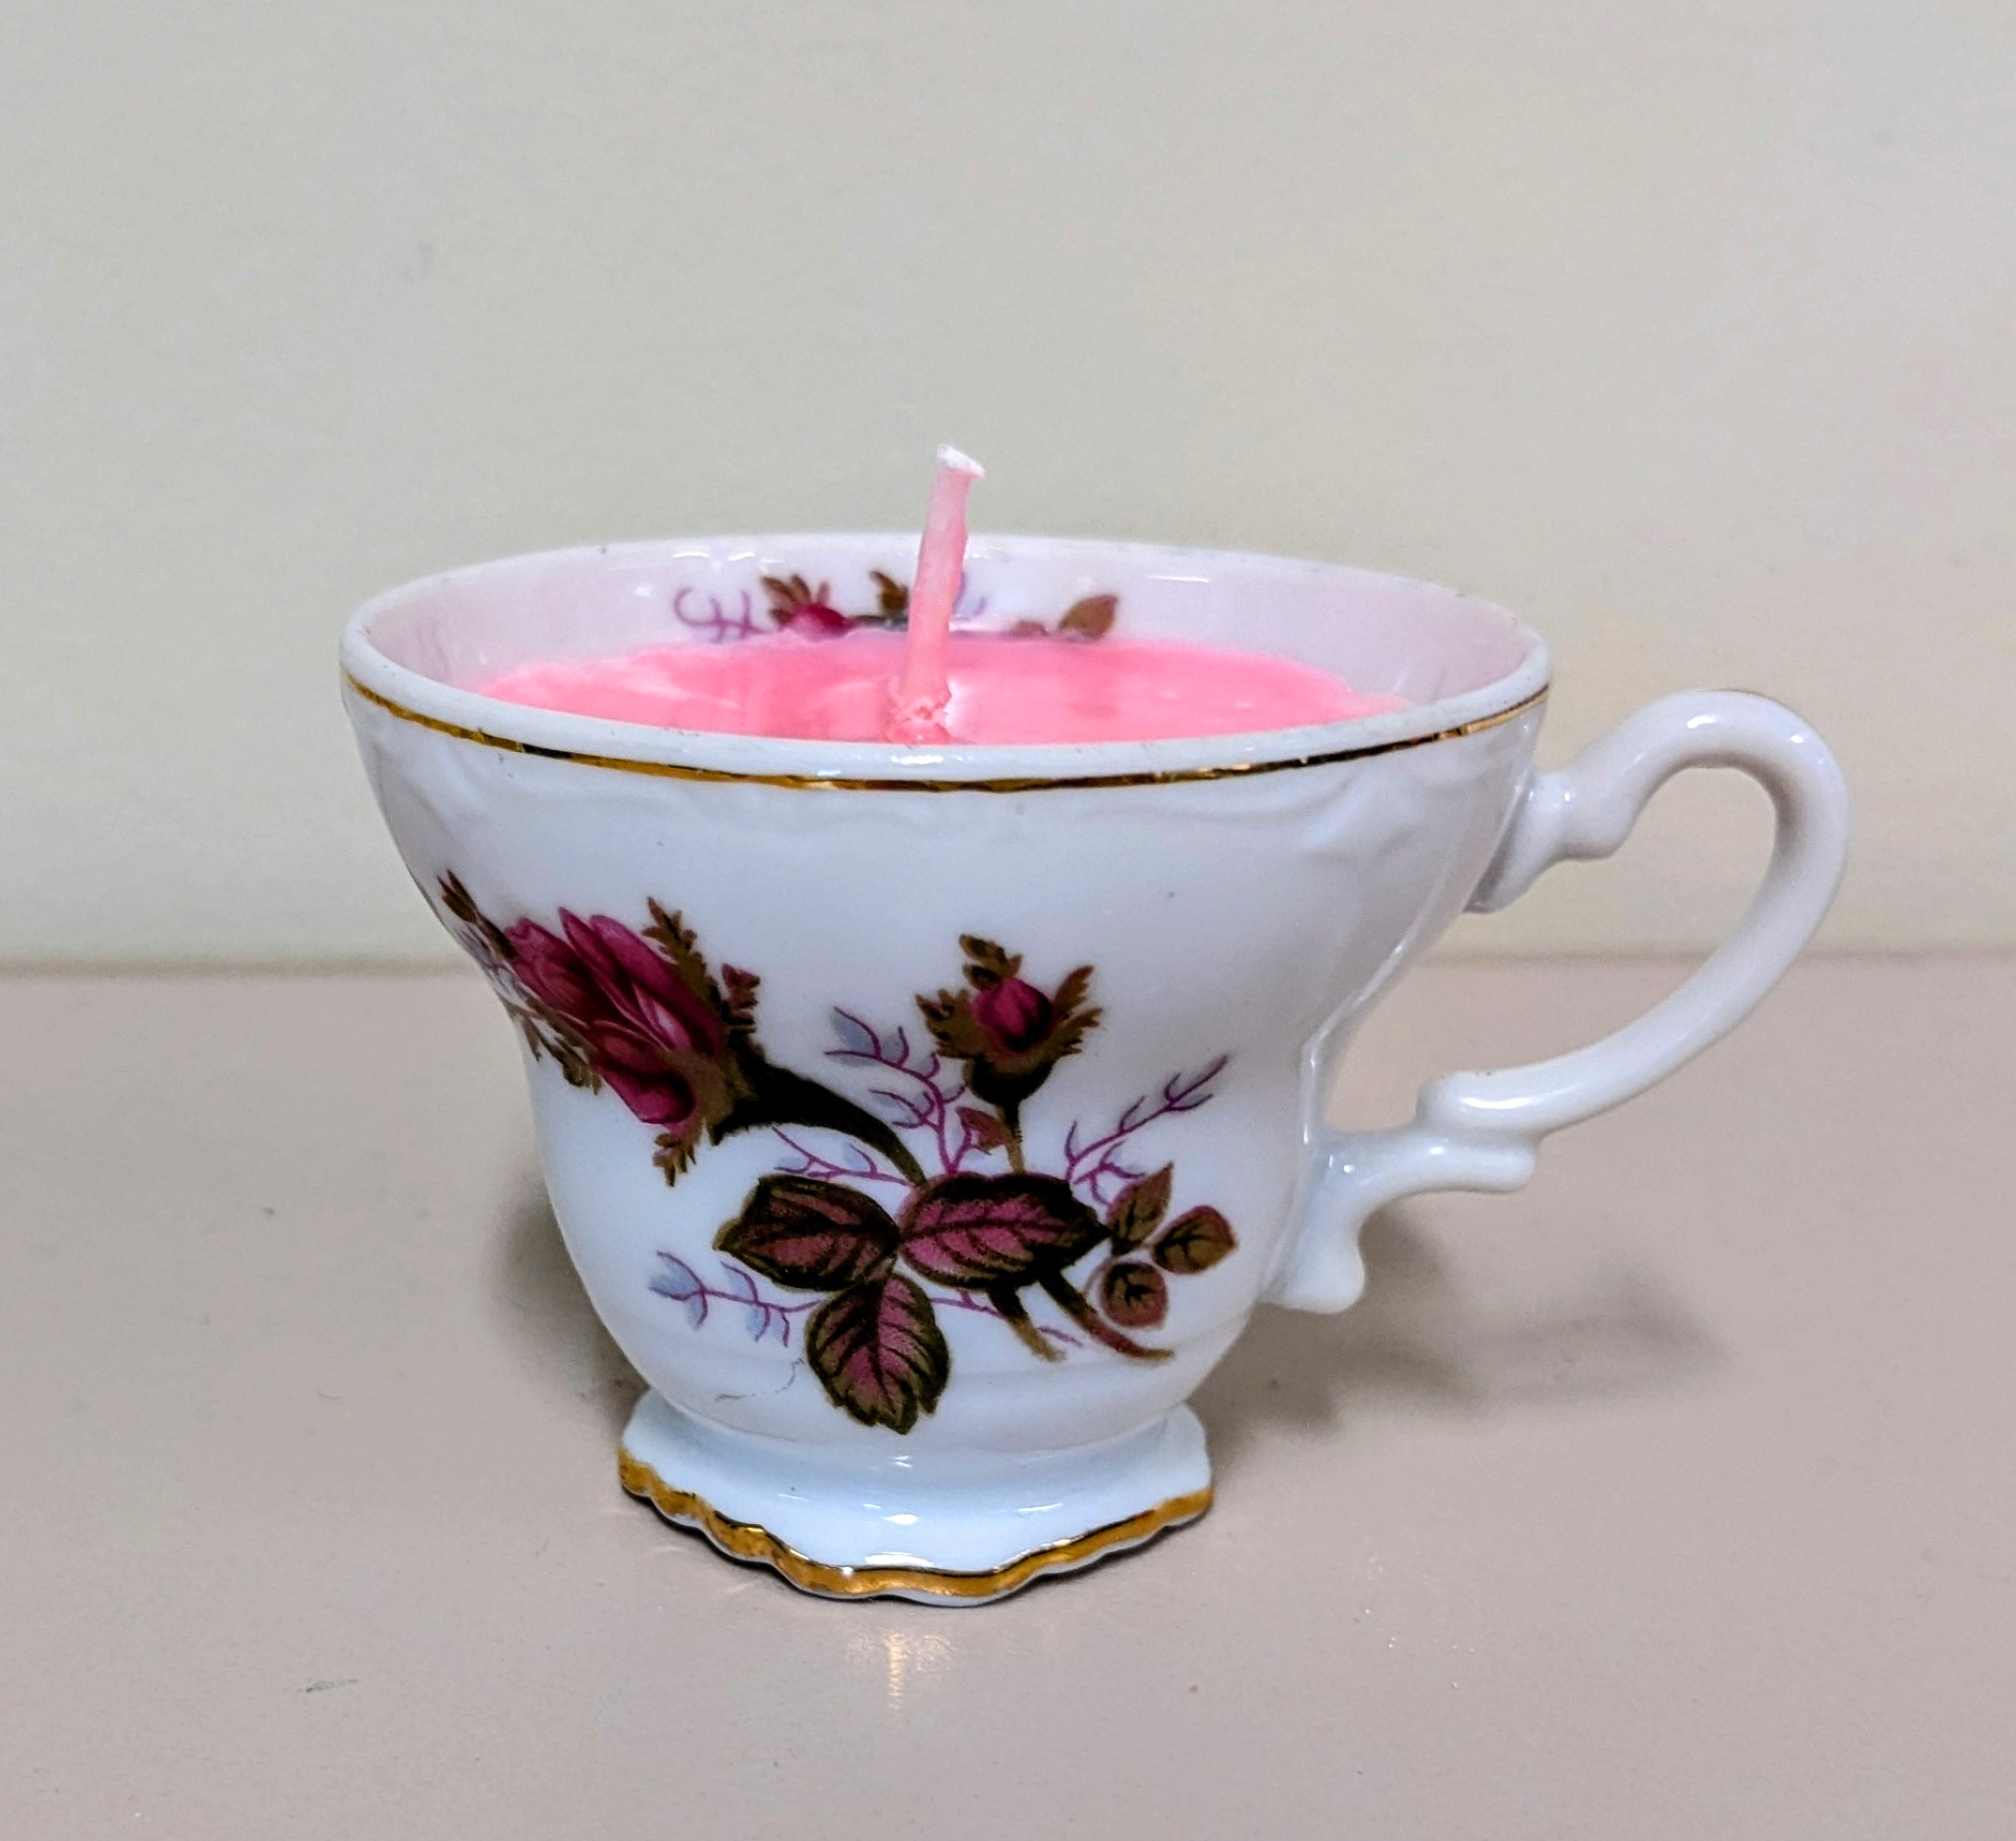 Pink candle in a small tea cup